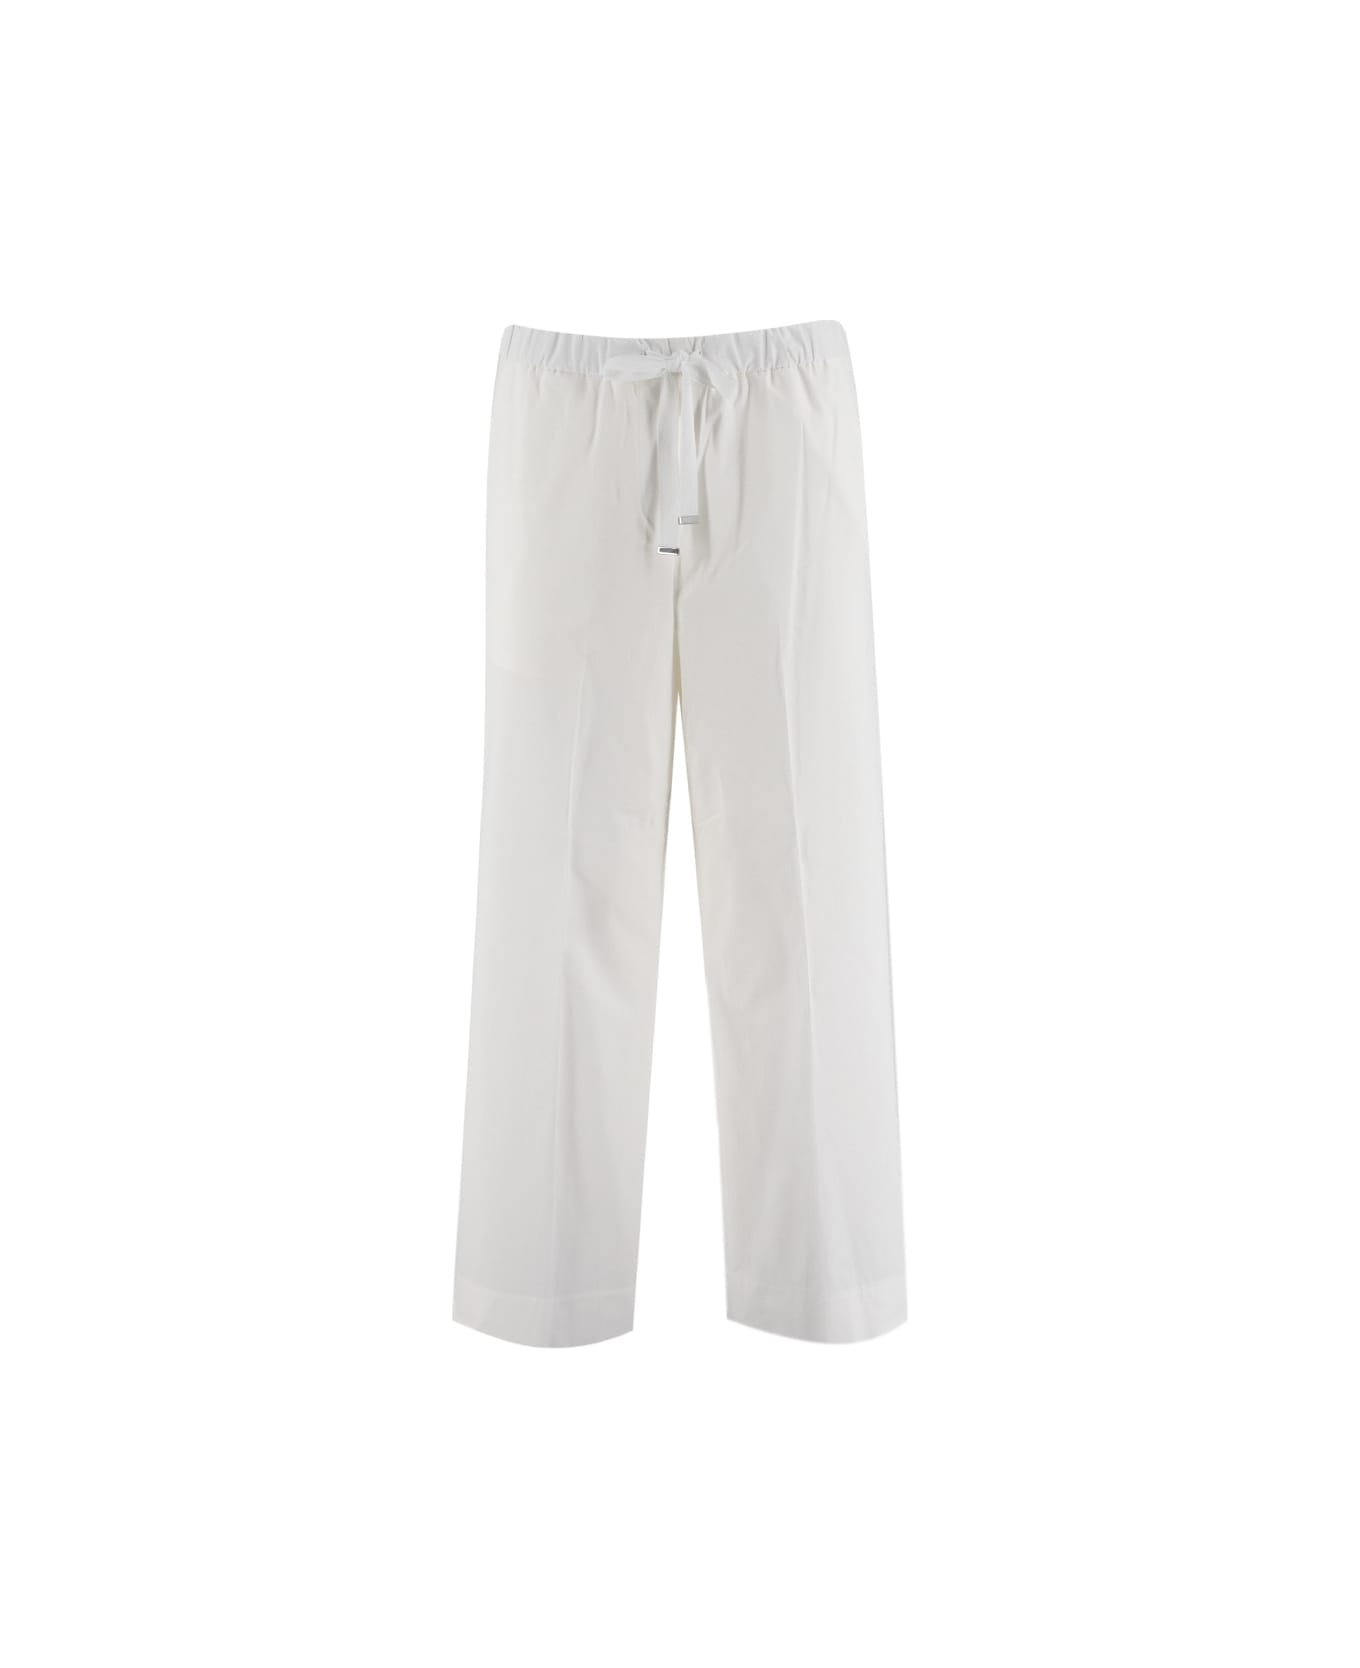 Le Tricot Perugia Trousers - WHITE ボトムス